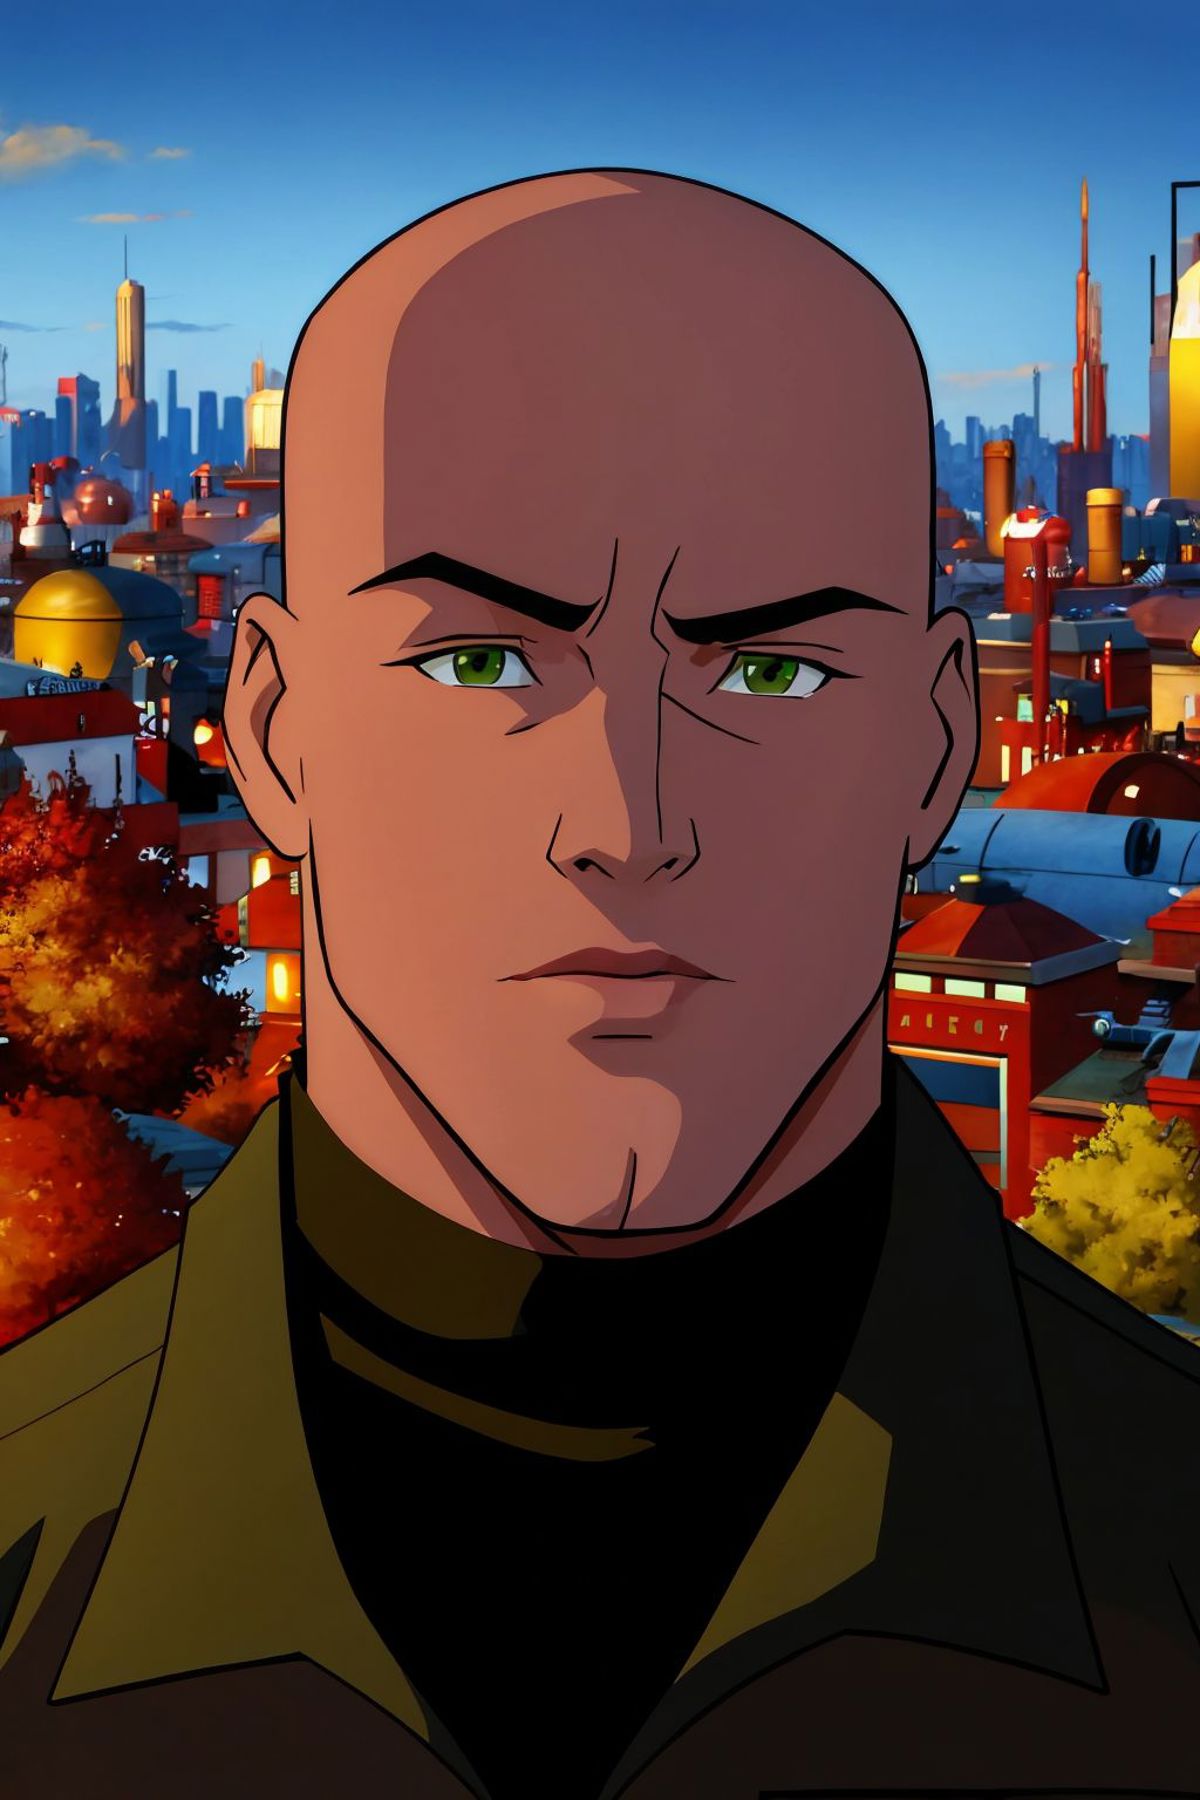 Lex Luthor - Tomorrowverse (DC Comics) image by Montitto